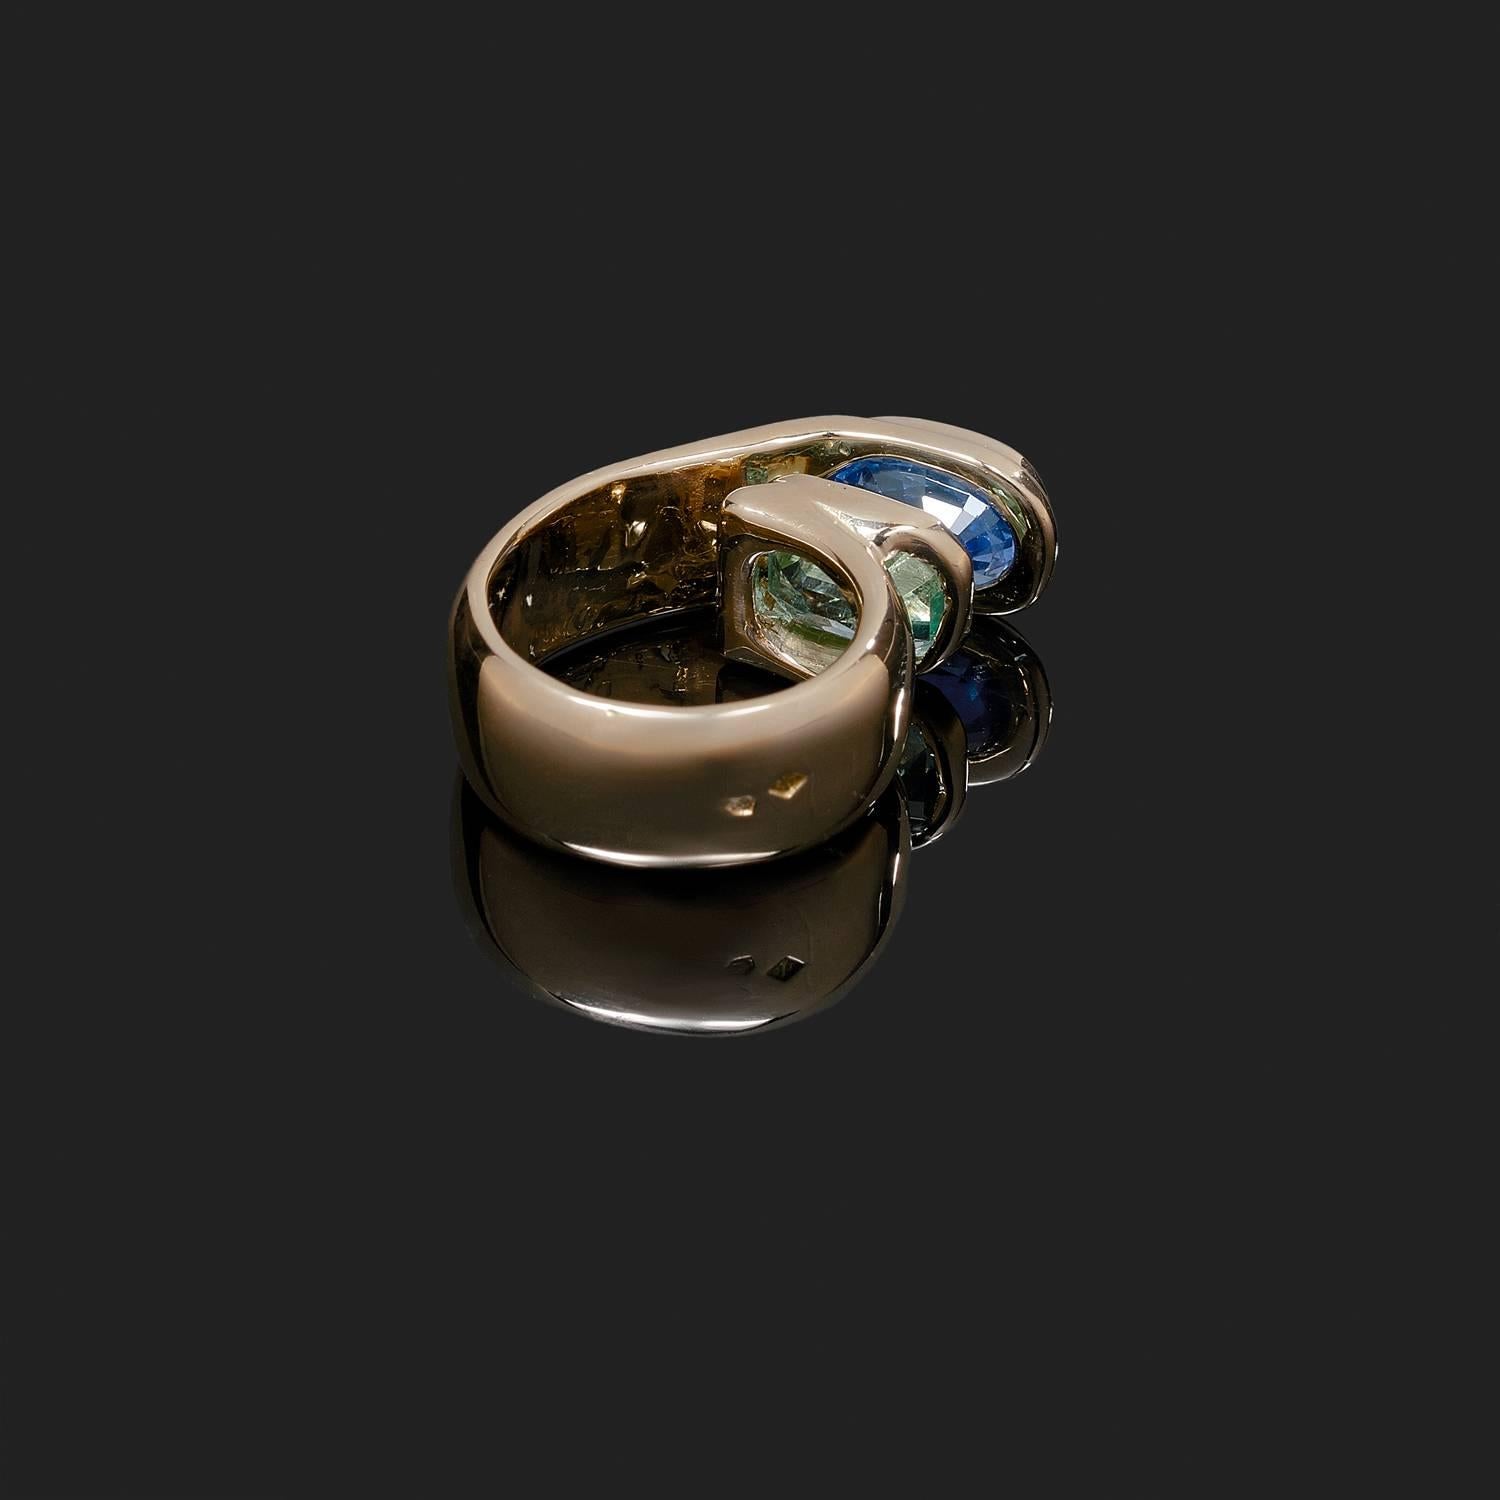 A sapphire, emerald and 18K gold ring. Signed Jean Vendôme.
Sapphire weight: 2,8 cts approx
Emerald weight: 2 cts approx
Total weight: 15 g.
Ring size: 3 1/4 (possibility to resize)